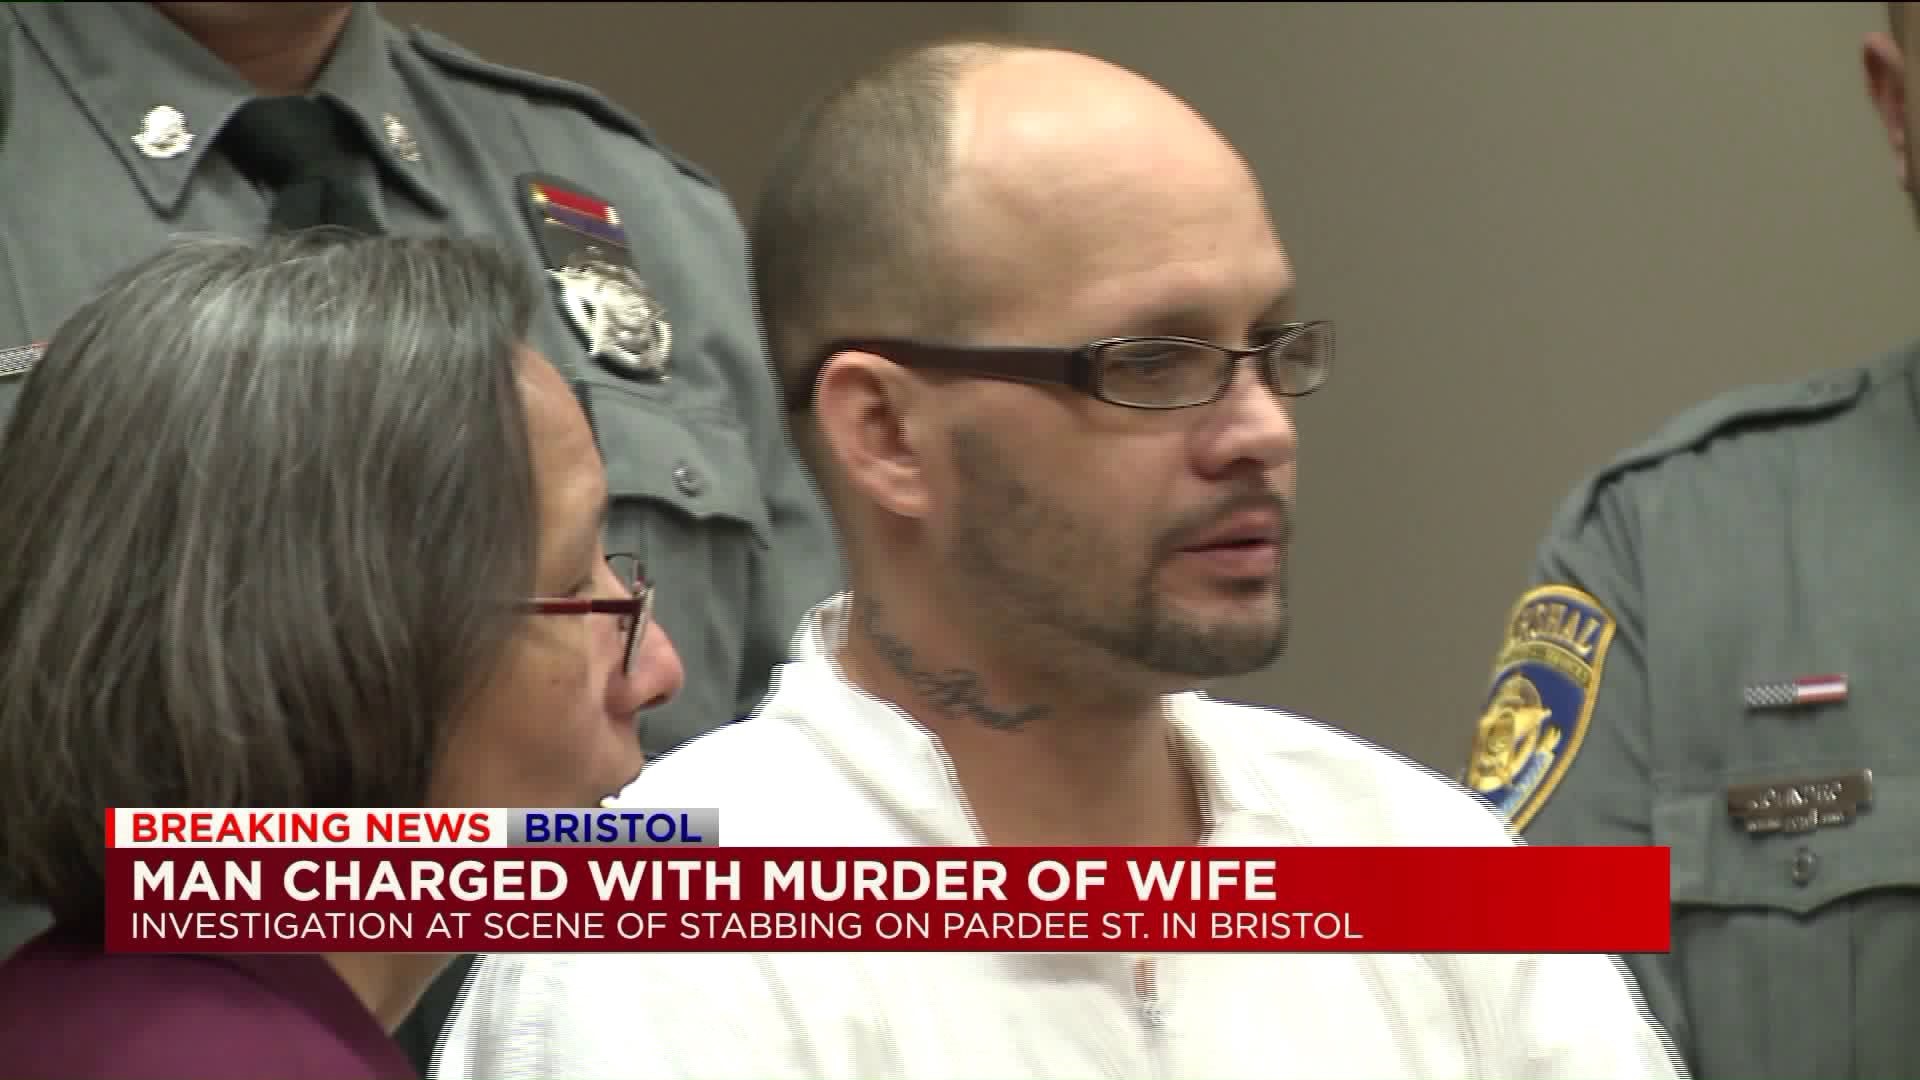 EXCLUSIVE: Bristol man charged with fatally stabbing his wife; held on $3 million